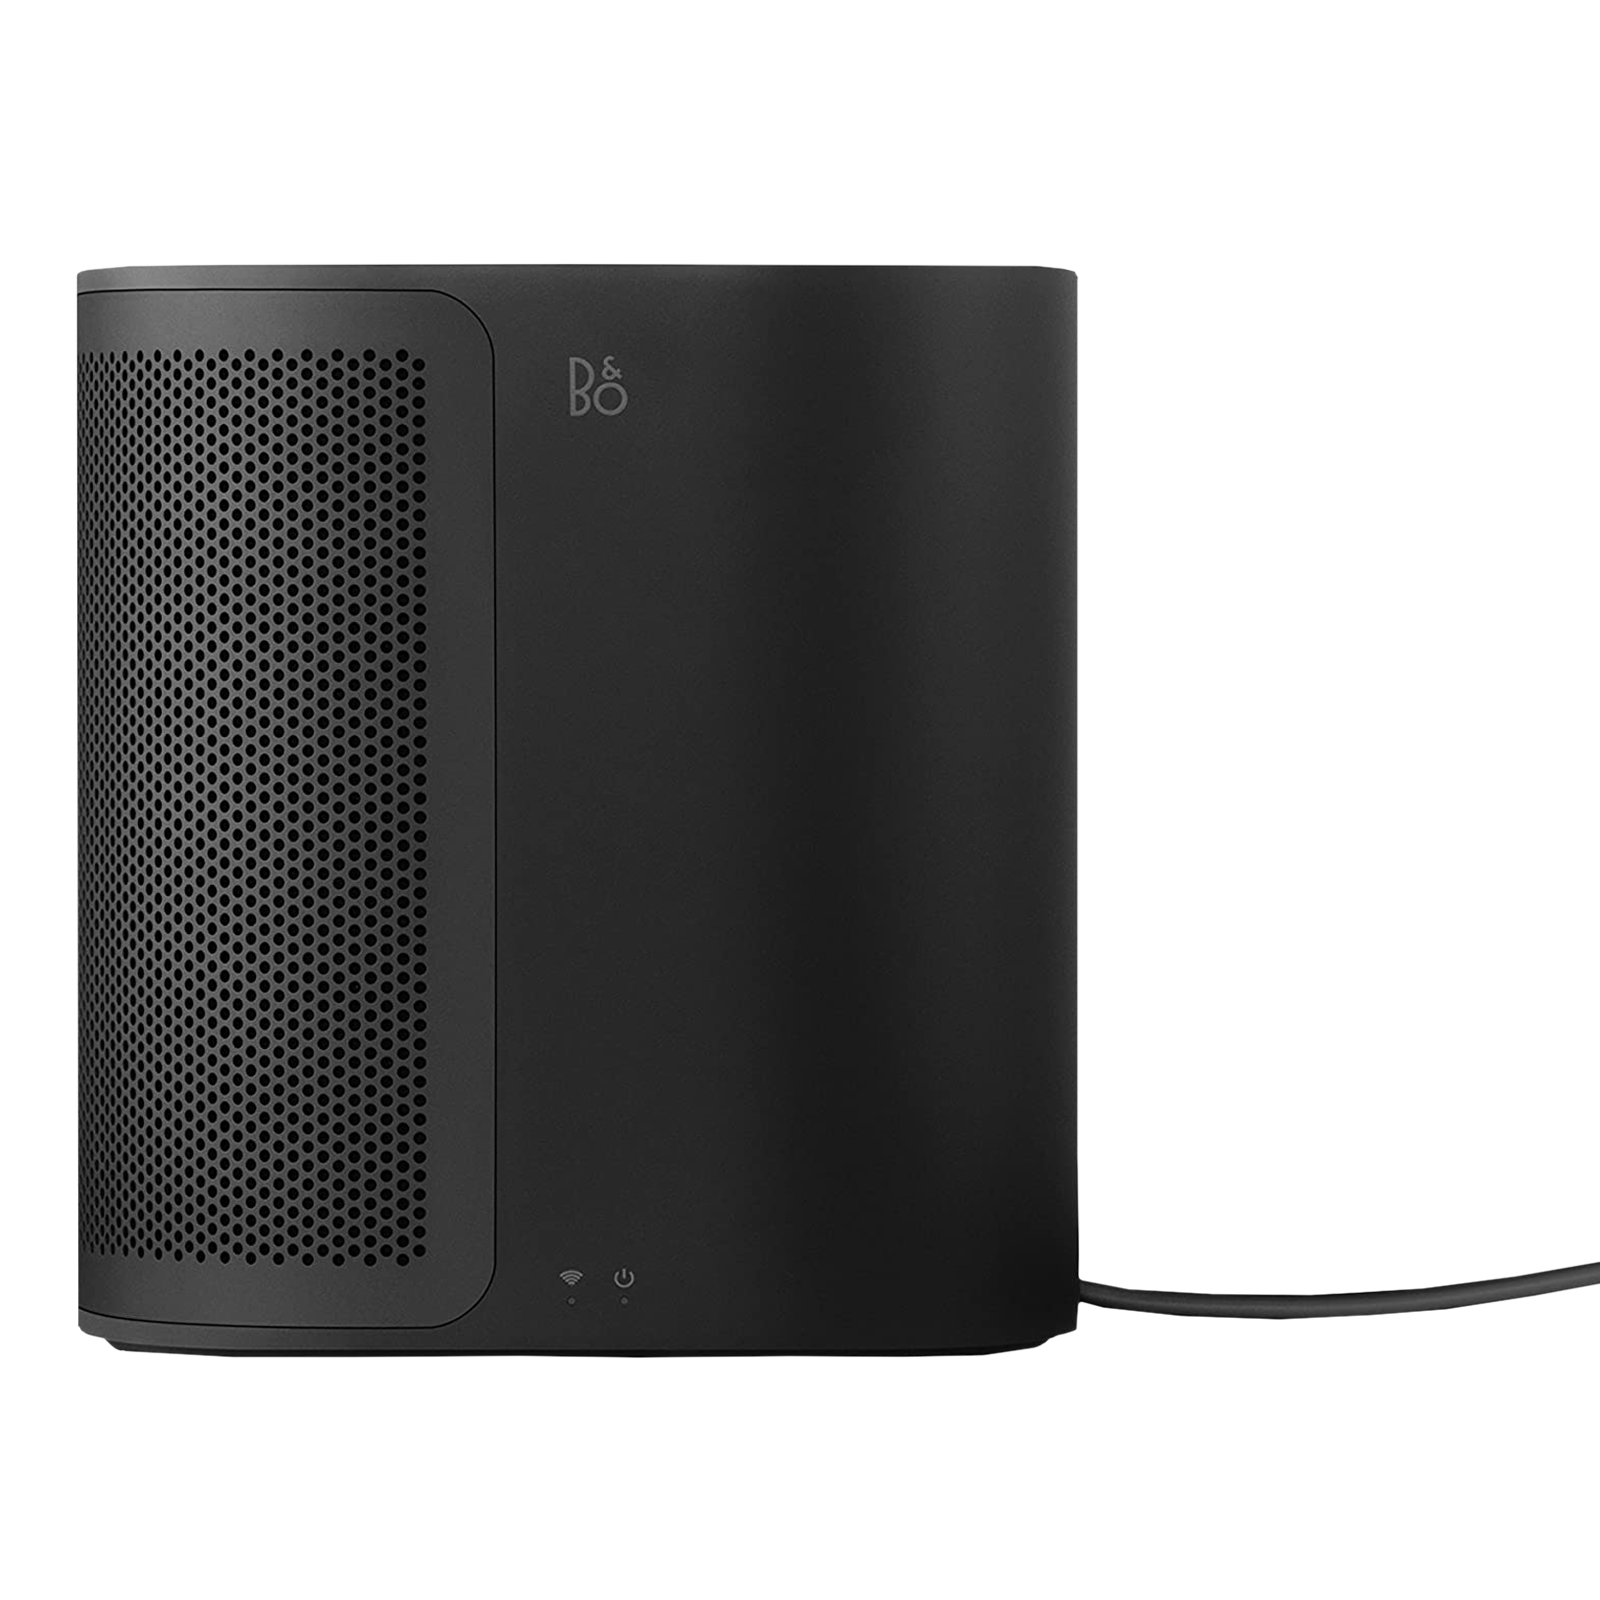 Bang & Olufsen Beoplay M3 Smart Wi-Fi Speaker (Customized Features, Black)